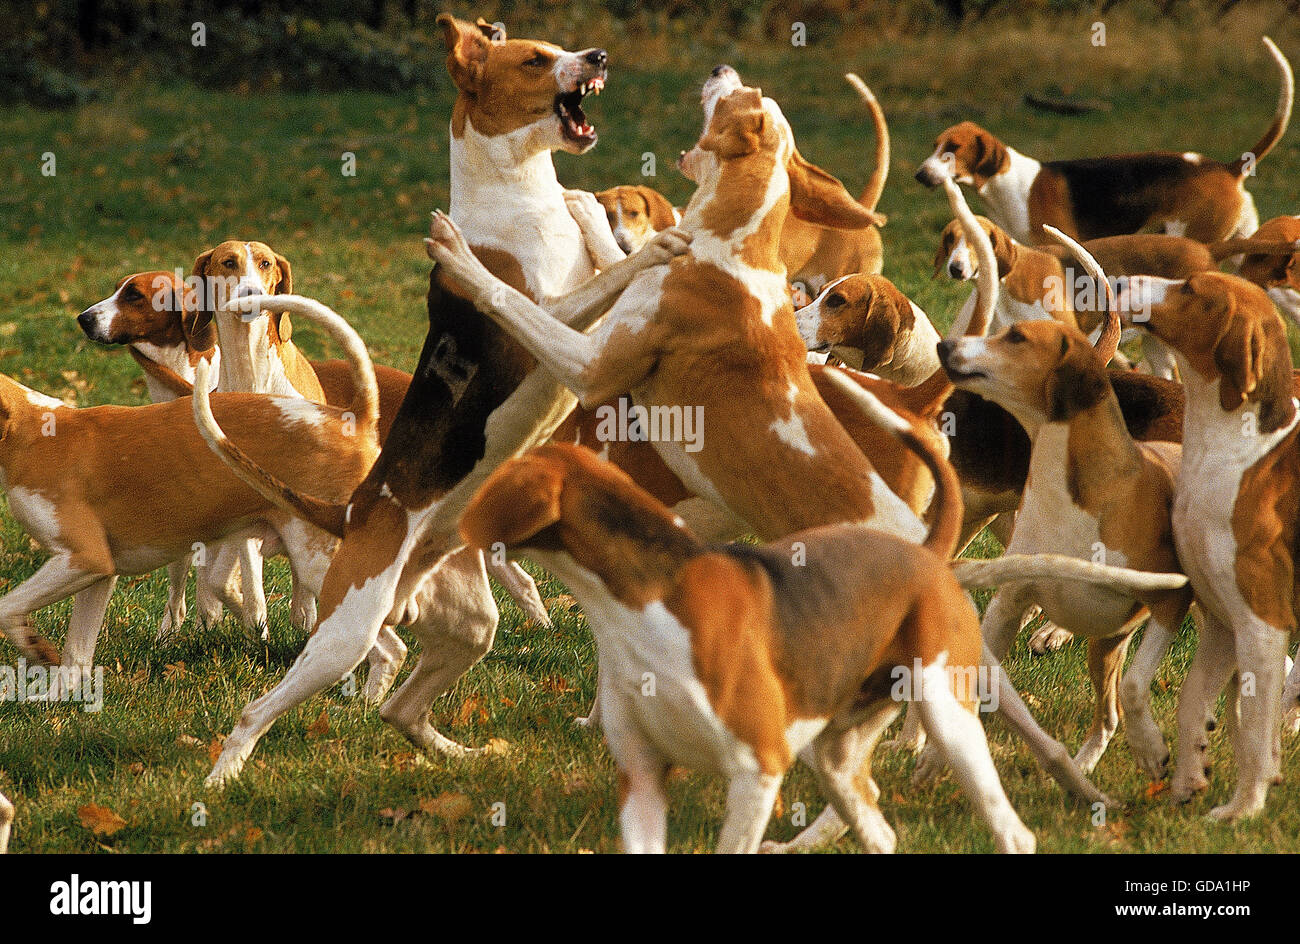 GREAT ANGLO-FRENCH TRICOLOUR HOUND AND GREAT ANGLO-FRENCH WHITE AND ORANGE HOUND, ADULT FIGHTING Stock Photo